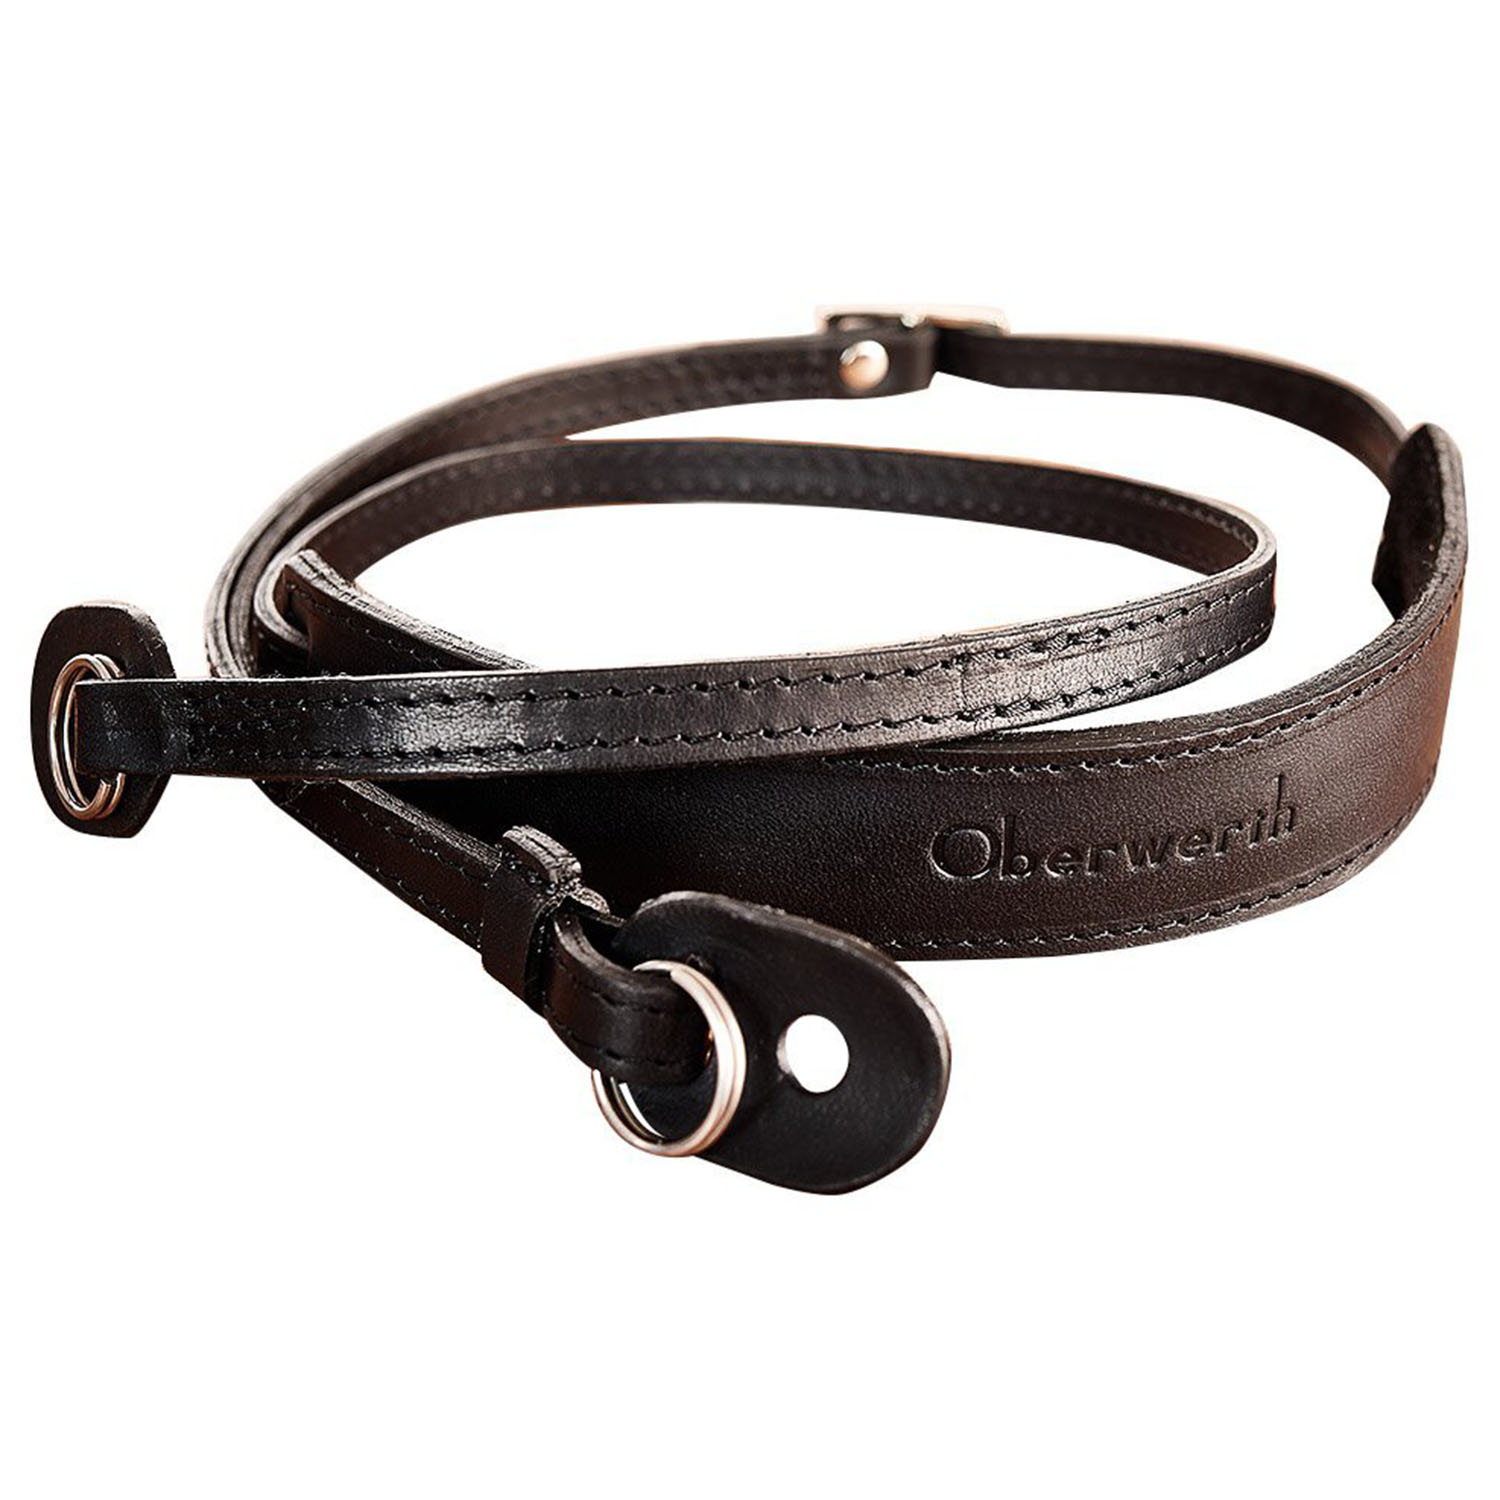 Oberwerth Mosel Cow-Hide Black Leather Strap Main Image